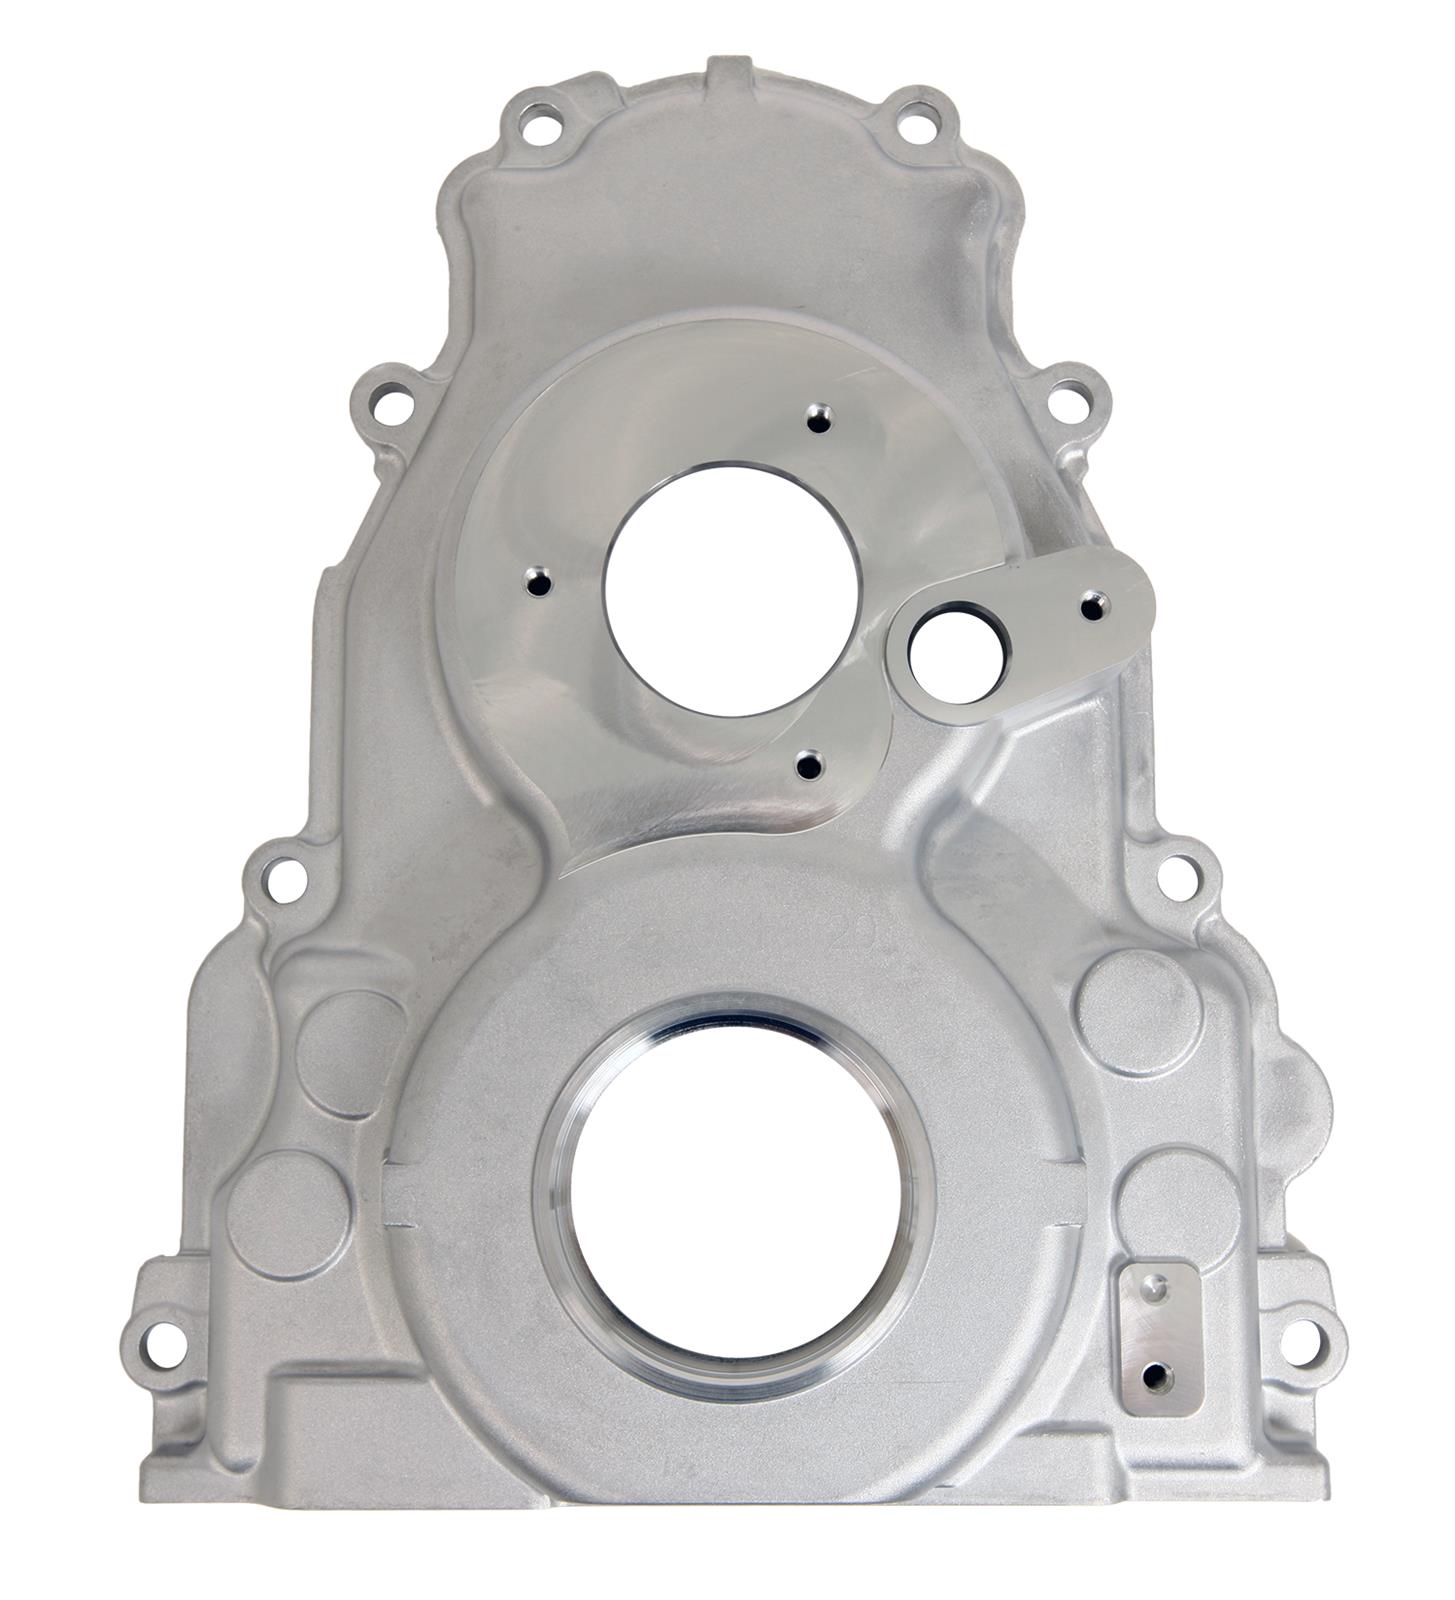 GM L92 Front Timing Chain Cover